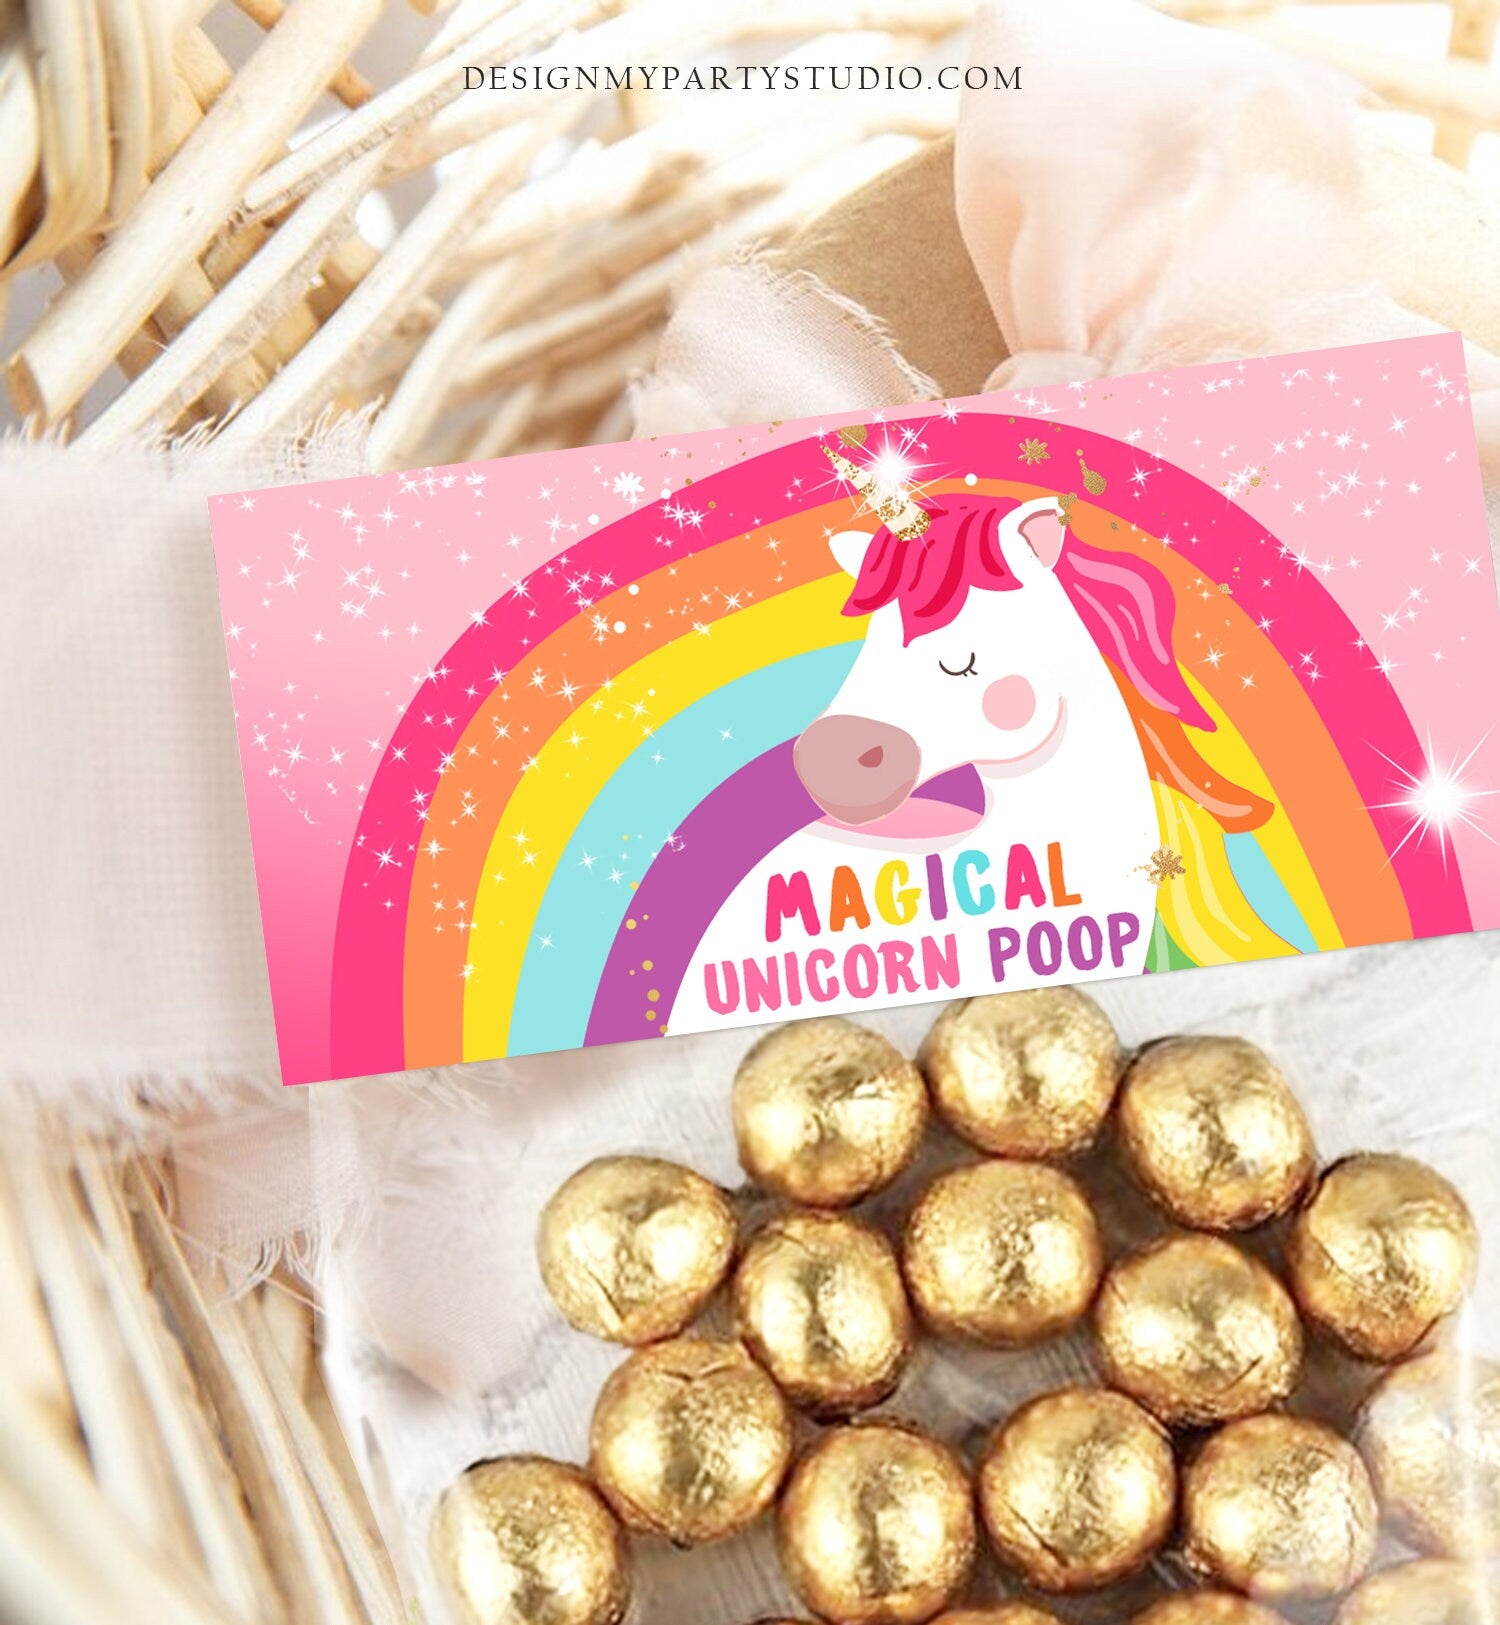 Printable Treat Bag toppers Unicorn Birthday Party Unicorn Poop Label Unicorn Party Favors Tag Instant Download DIGITAL PRINTABLE 0323